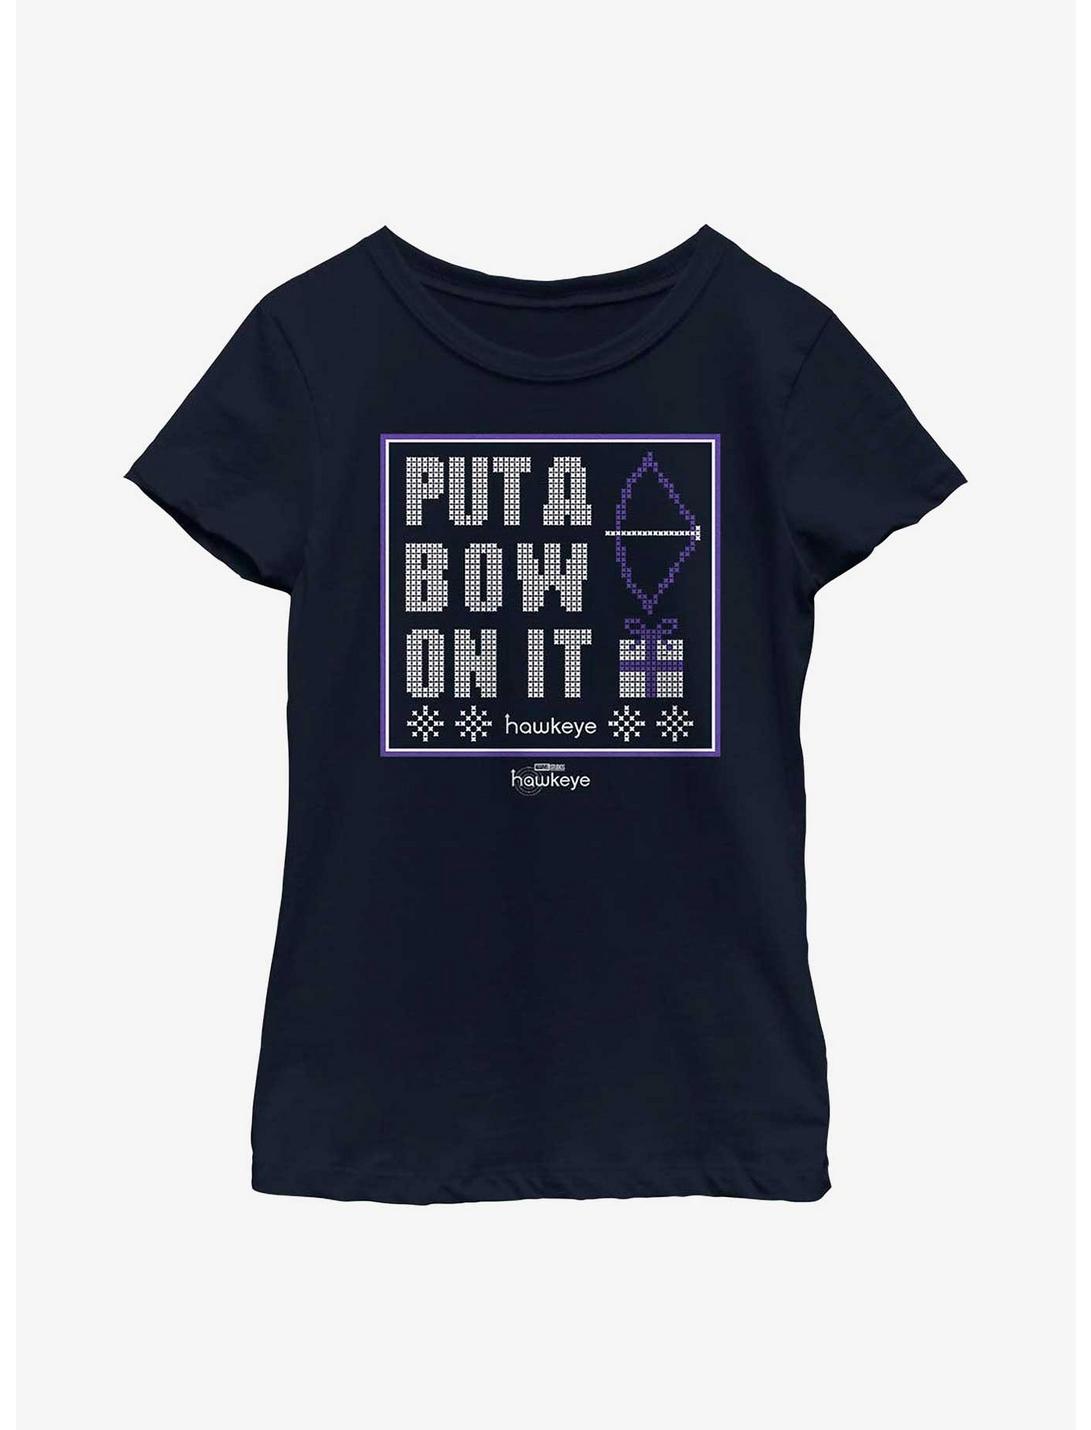 Marvel Hawkeye Put A Bow On It Youth Girls T-Shirt, NAVY, hi-res